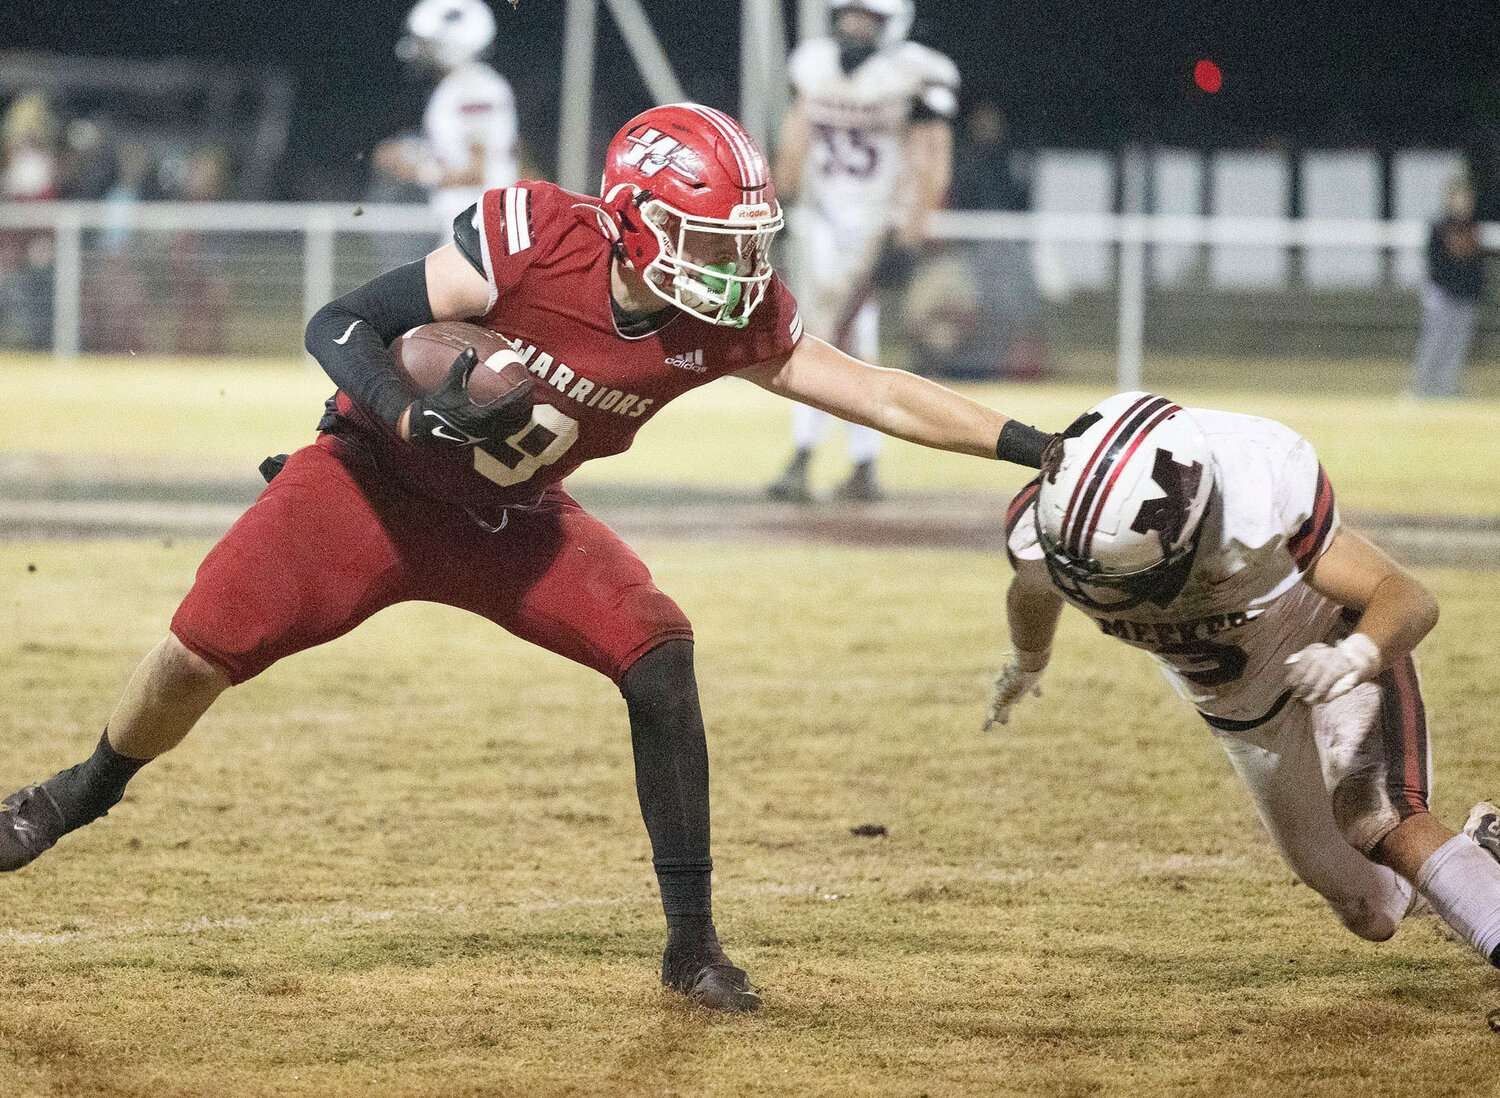 Washington junior Nate Roberts stiff arms a Meeker defender Friday night during the Warriors’ 56-7 win over the Bulldogs. Roberts had two catches for 15 yards.